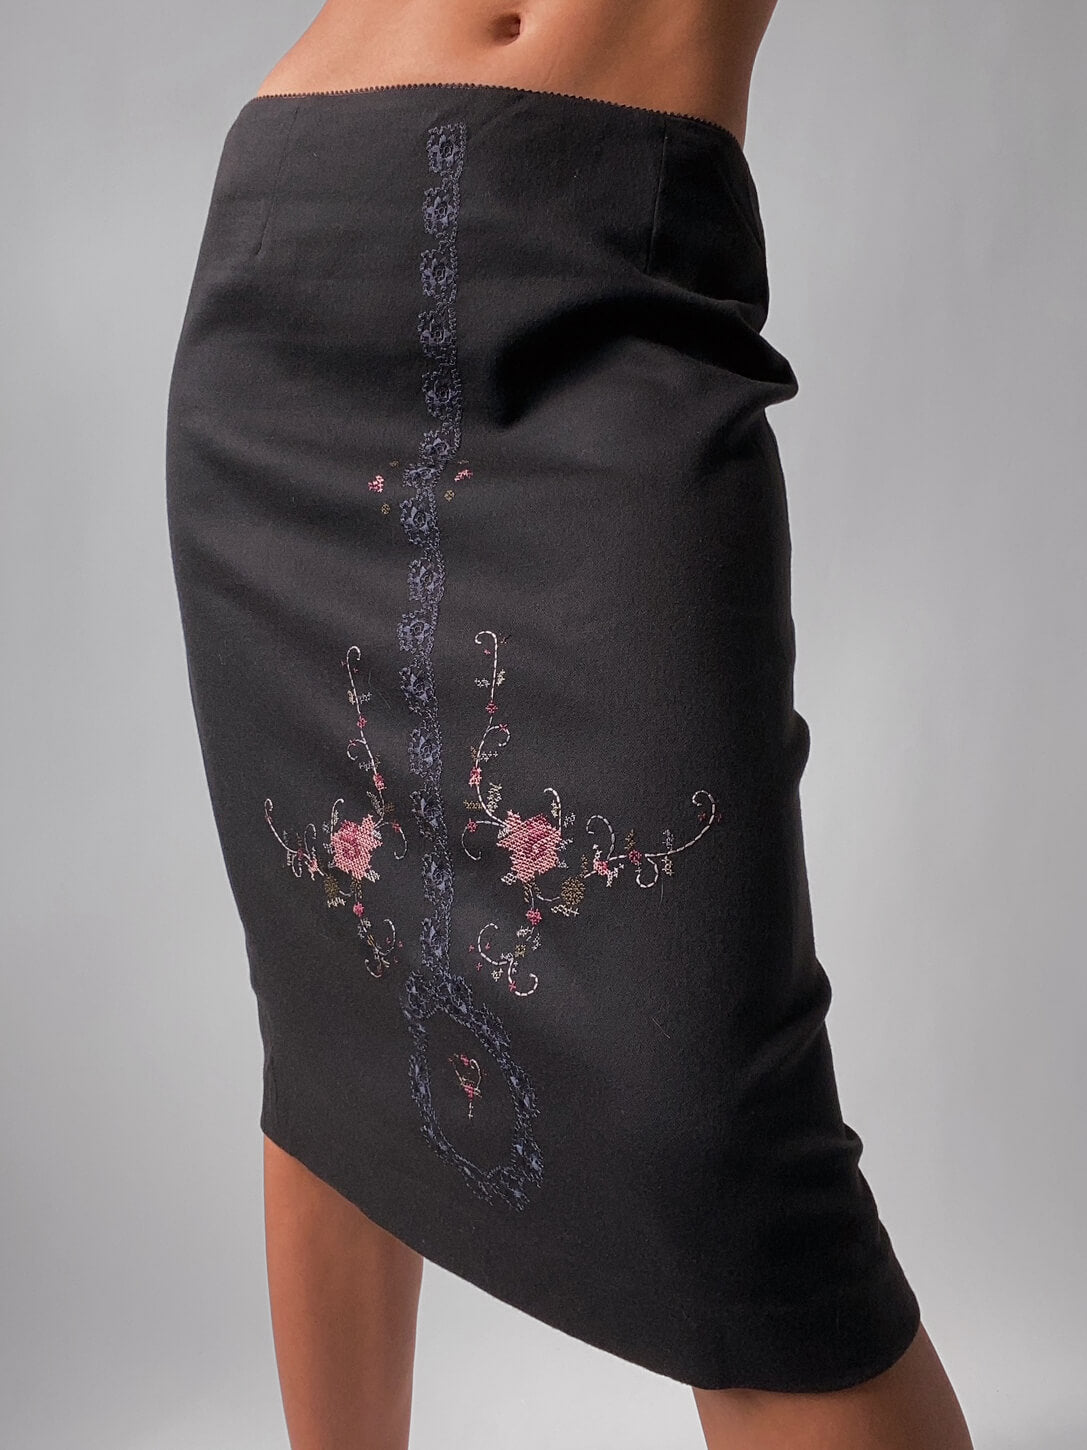 Vintage Needle Point Embroidery Skirt | S